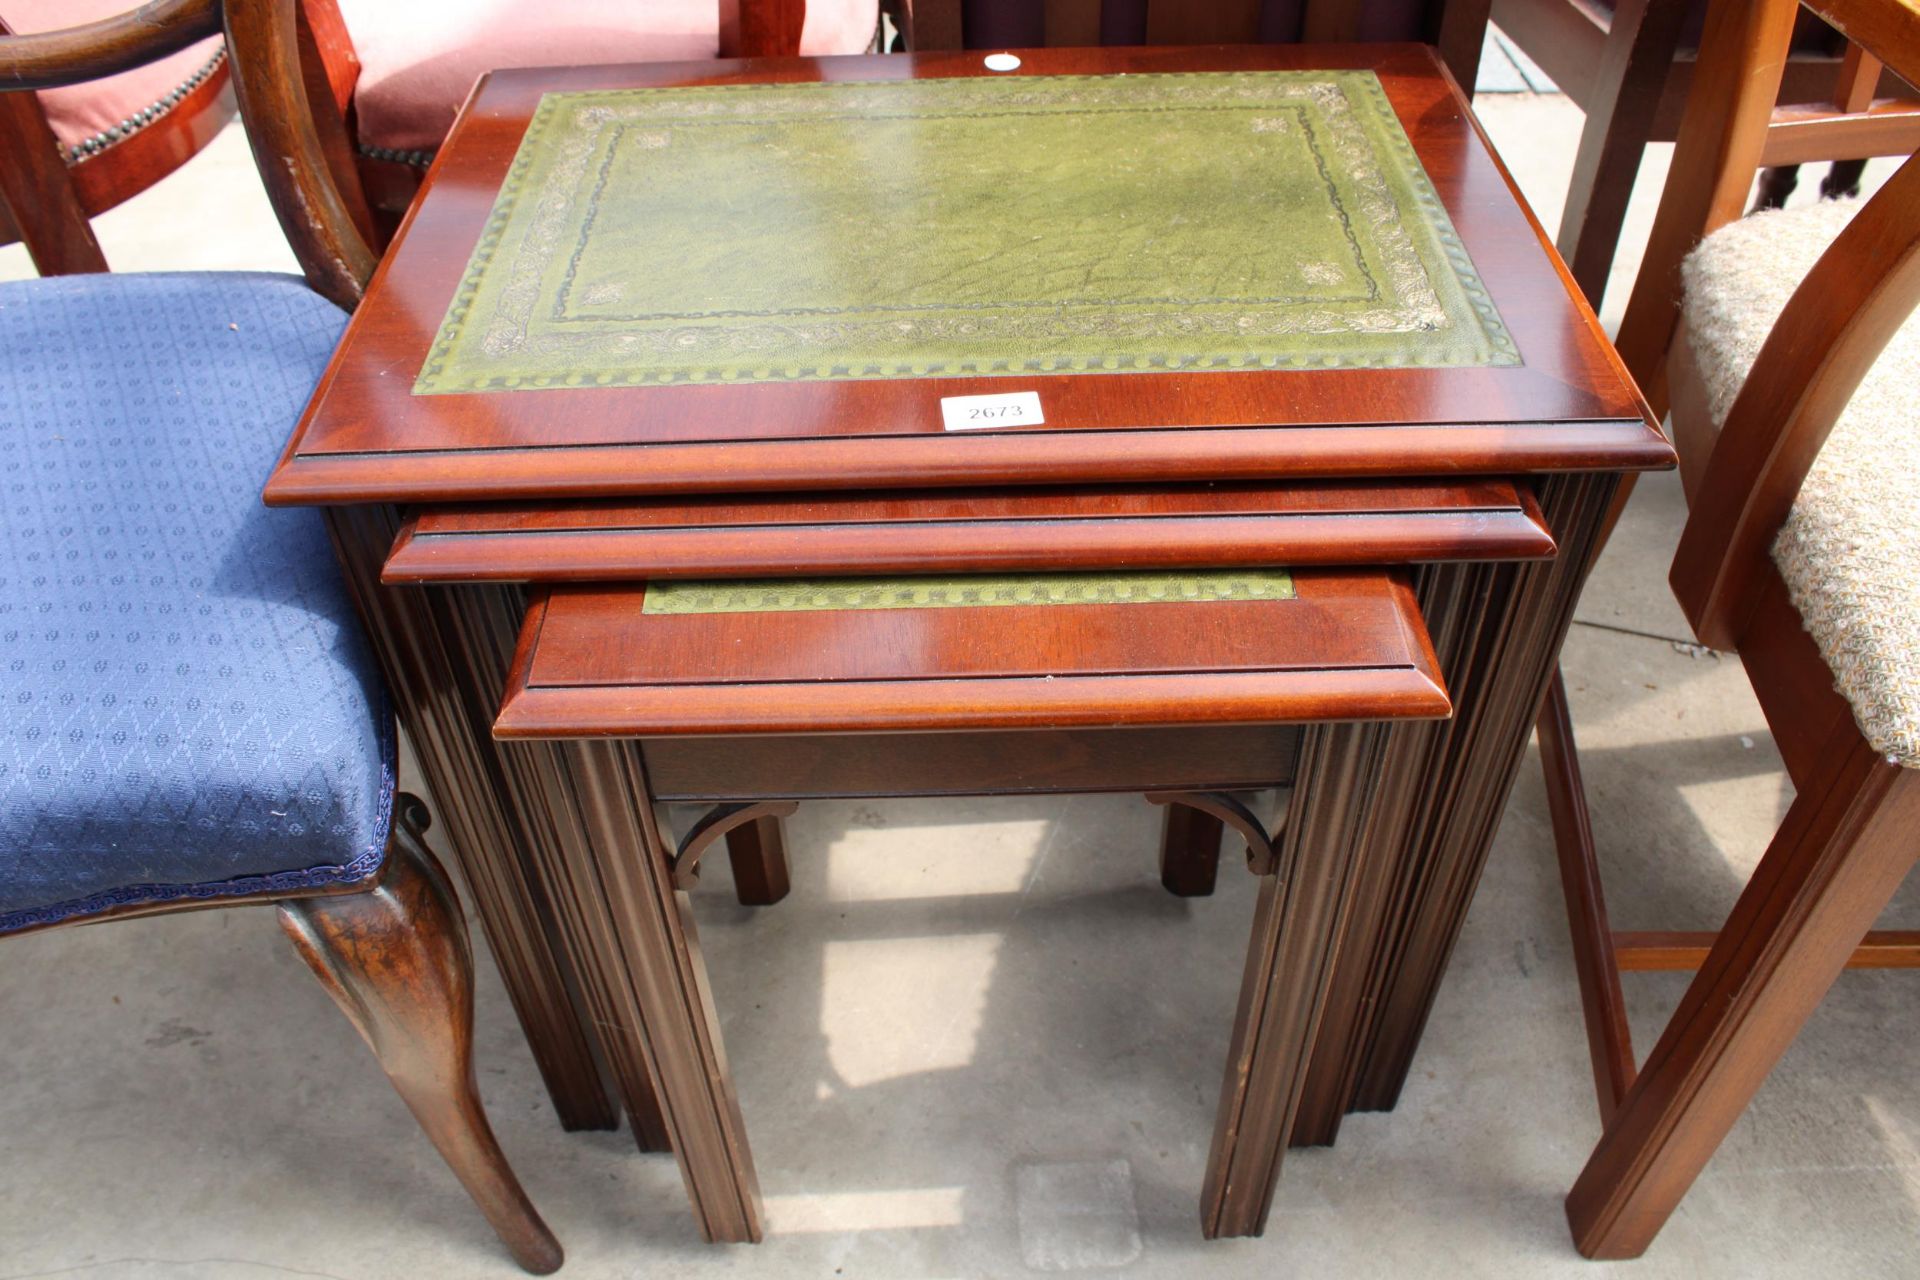 A NEST OF THREE MAHOGANY TABLES WITH INSET LEATHER TOPS AND A PAIR OF VICTORIAN PARLOUR CHAIRS - Image 3 of 4